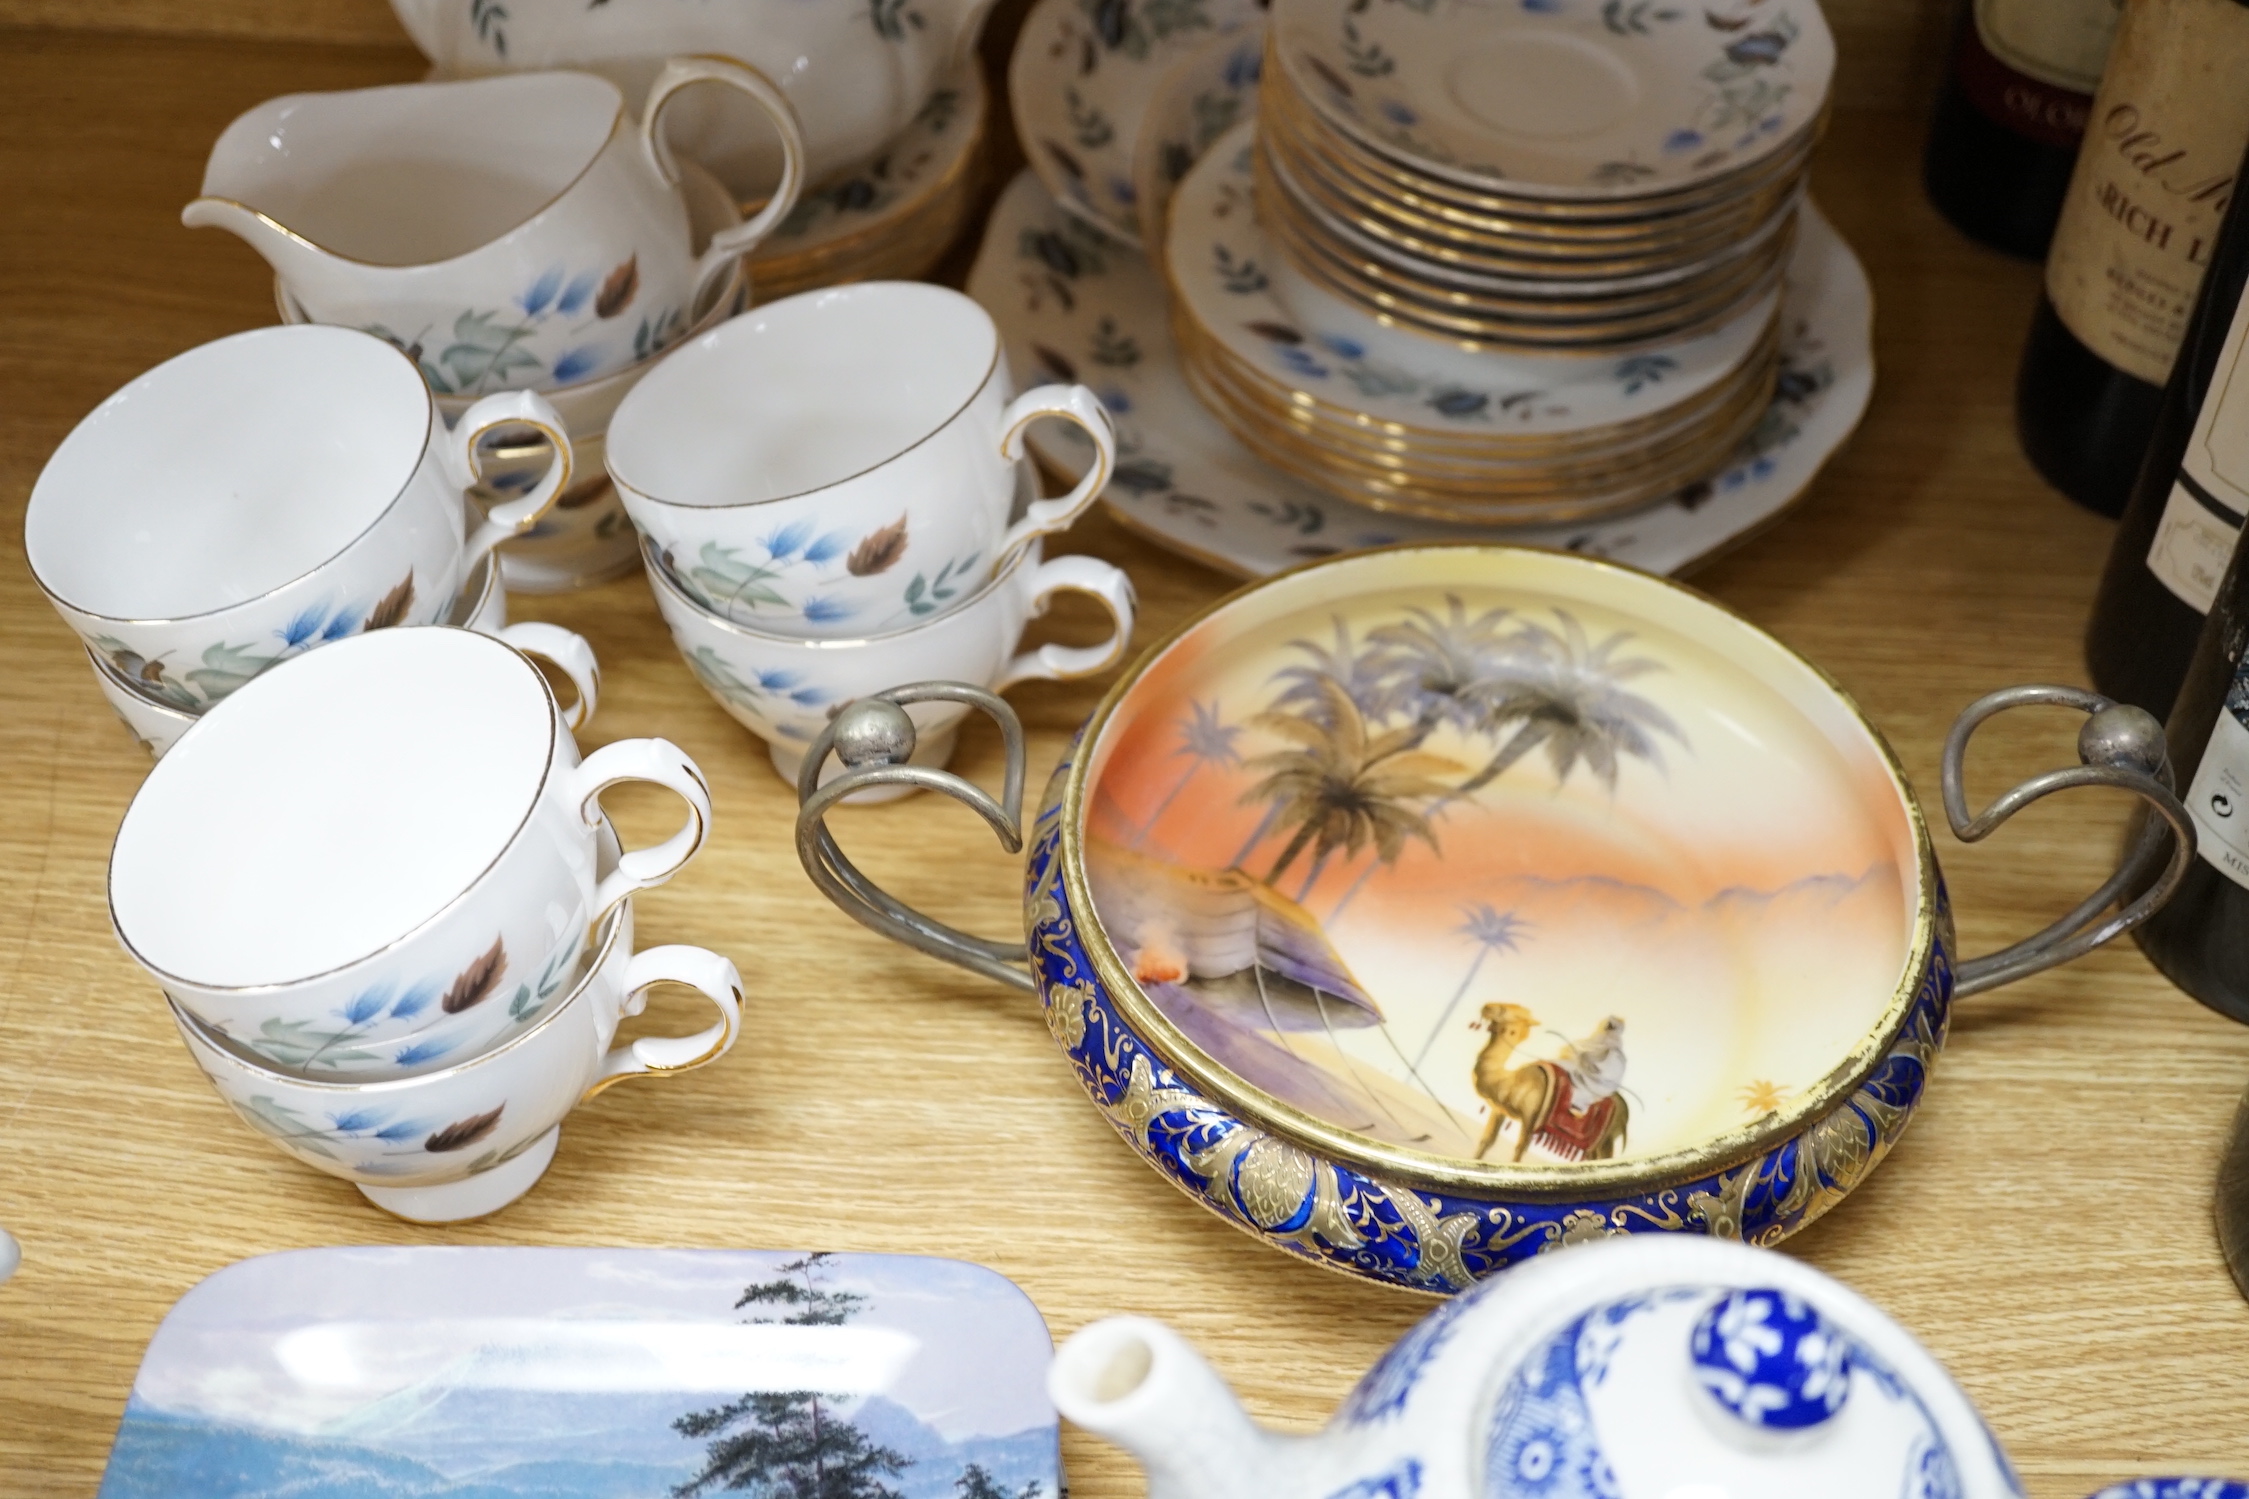 A Noritake ‘Egypt sunset scene’ bowl, a blue and white teapot and a Colclough teaset